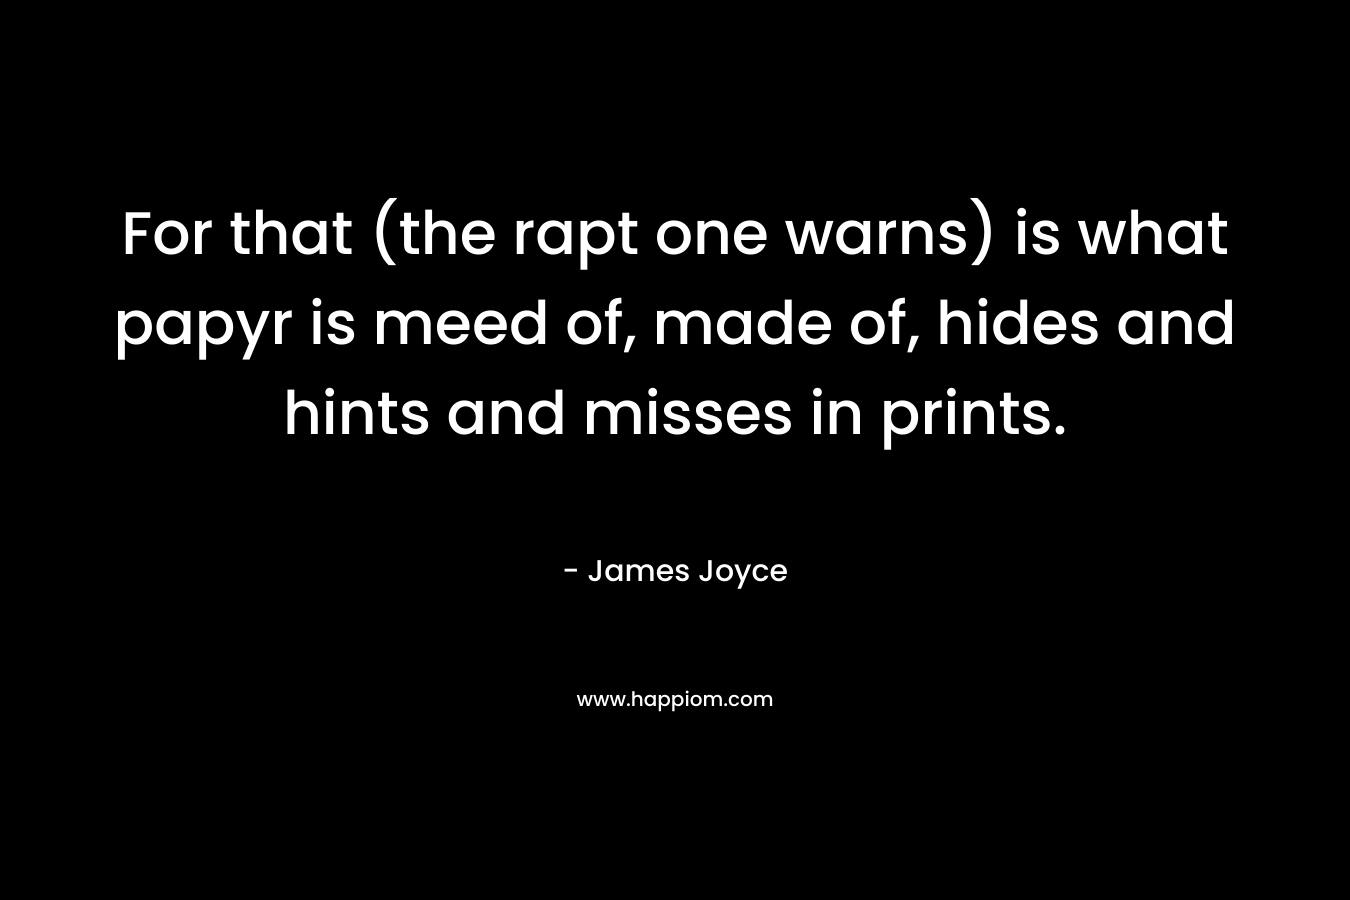 For that (the rapt one warns) is what papyr is meed of, made of, hides and hints and misses in prints. – James Joyce